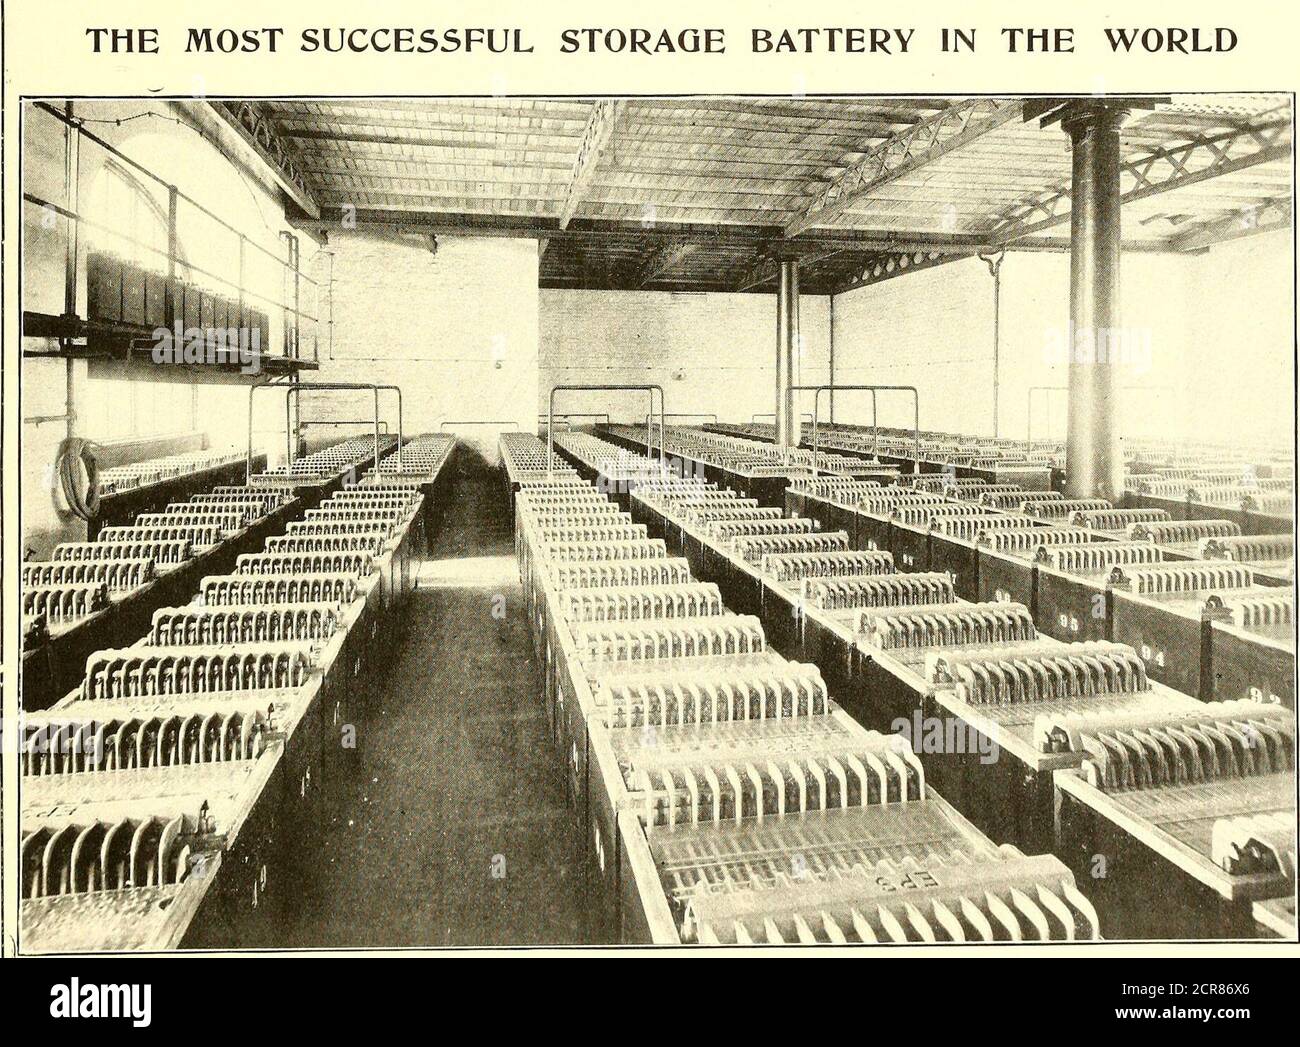 . The Street railway journal . GOLD MEDALPARIS1900 THE MOST SUCCESSFUL STORAGE BATTERY IN THE WORLD. Battery of 496 E. P. S. Cells (P. type) erected for the Liverpool Overhead Railway SPECIAL K. L. P. TYPE FOR POWER STATIONS Amongst other installations we may mention Liverpool Corporation (twelve batteries),Bradford Corporation (two batteries), Liverpool Overhead Railway (two batteries) ; besidesLeith, Willesden, Rathbone Place, Wigan, Ilford, Birmingham, Birkenhead, Perth, etc. 64 STREET RAILWAY JOURNAL. WALTER SGOTT, Ltd. LEEDS STEEL WORKS, LEEDS, ENGLAND r^/jNor/^cTUfiEFts or ROLLED STEEL J Stock Photo